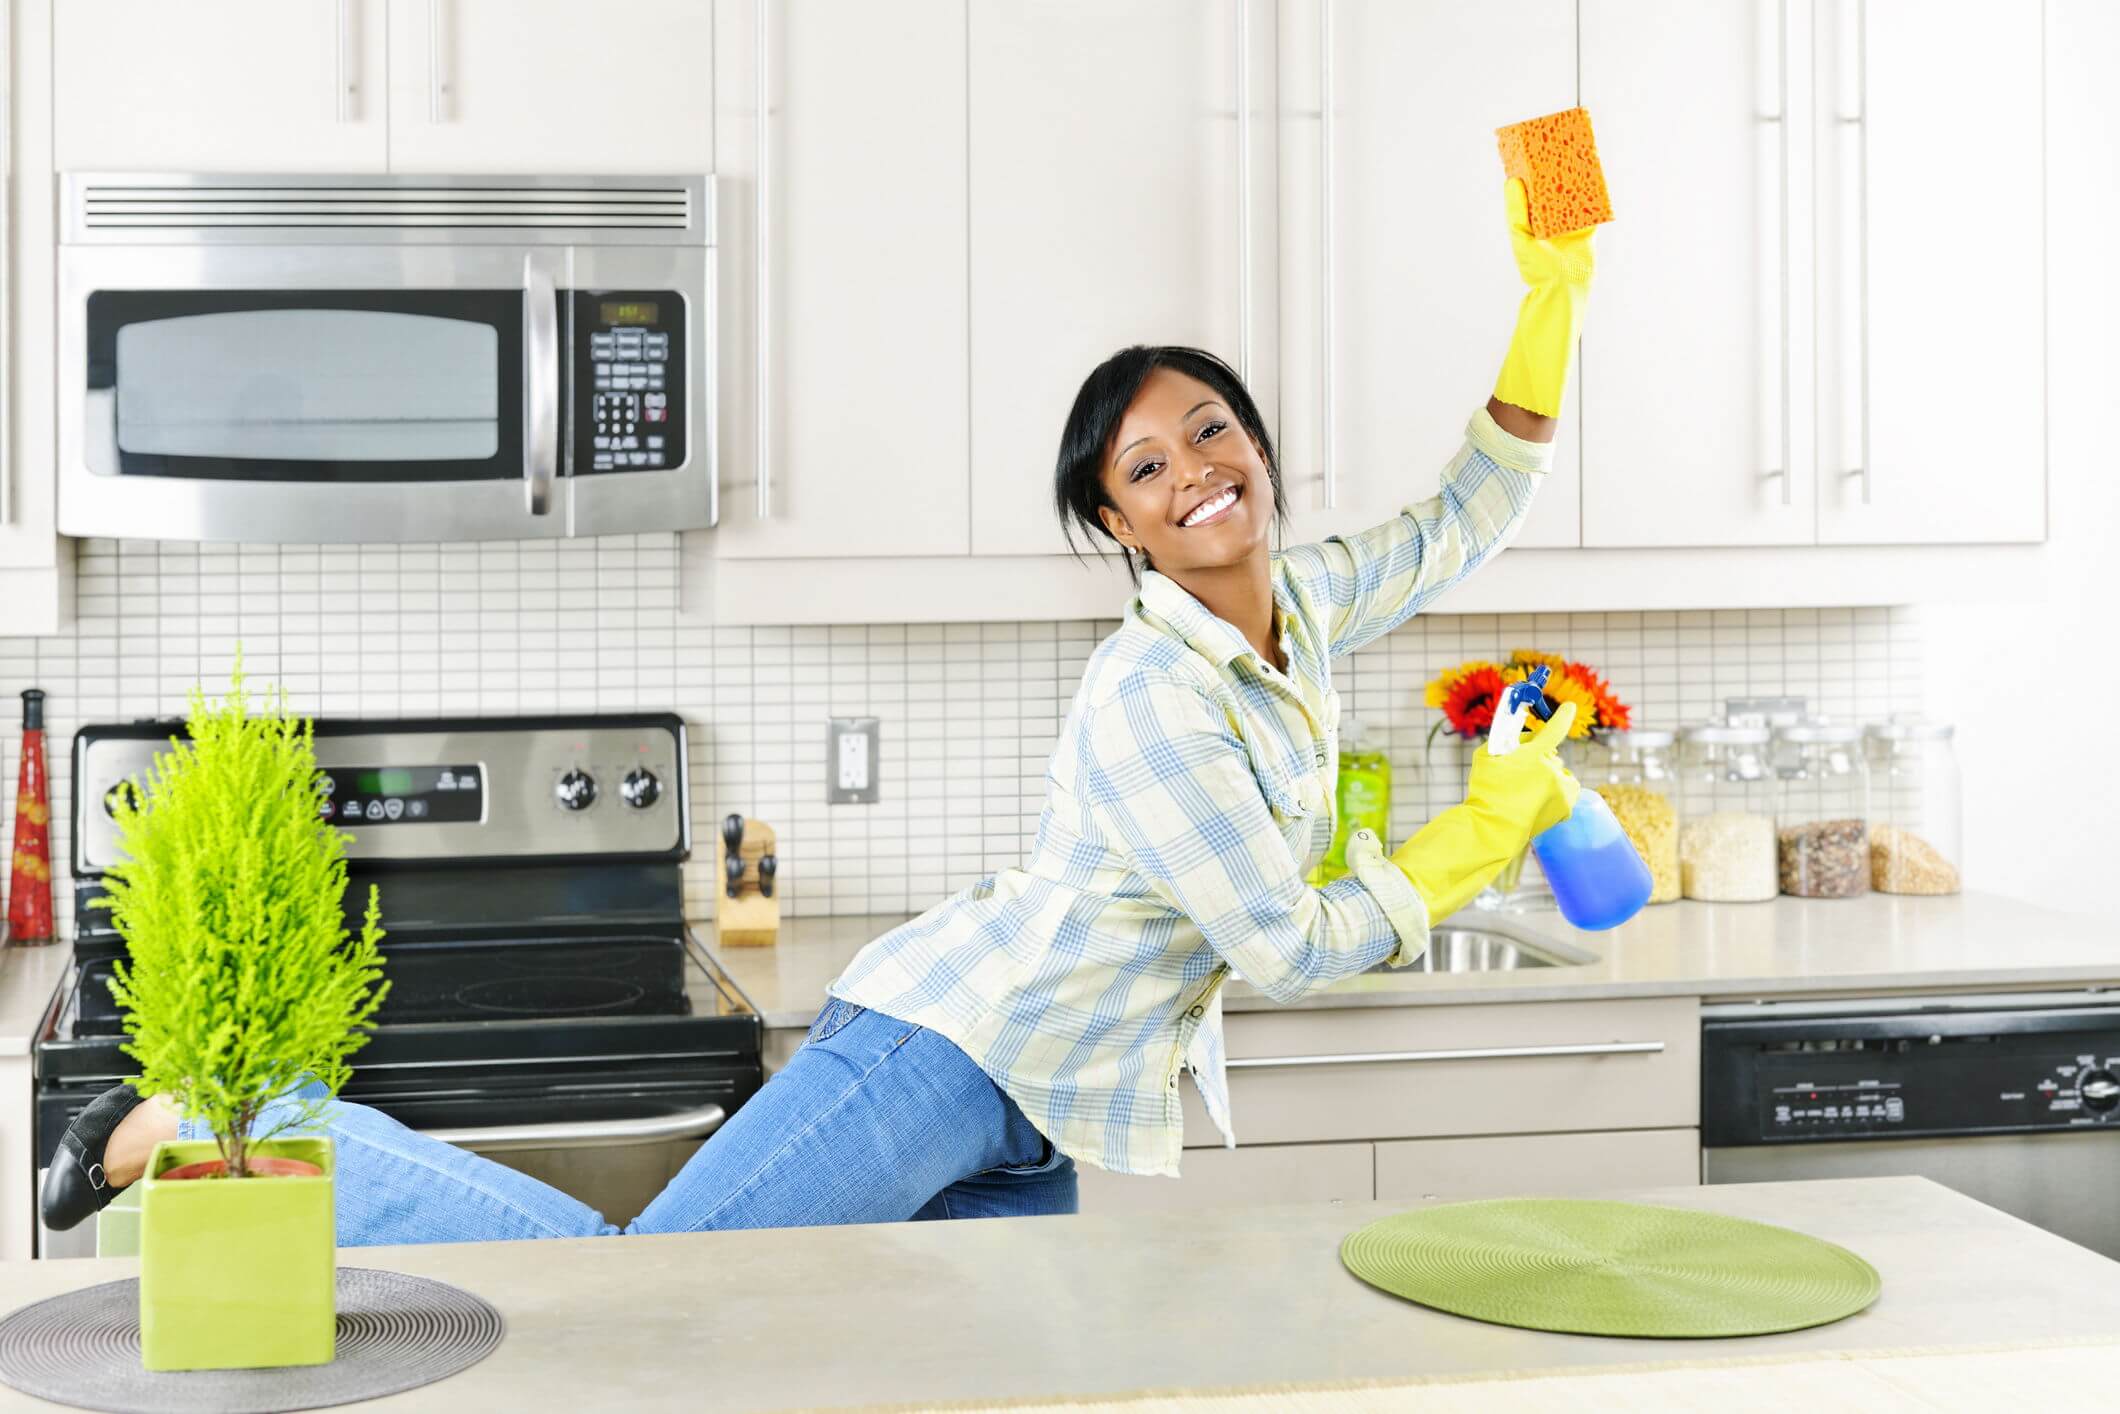 10 Essential Cleaning Hacks For Your Home - Green and Gold Cleaning